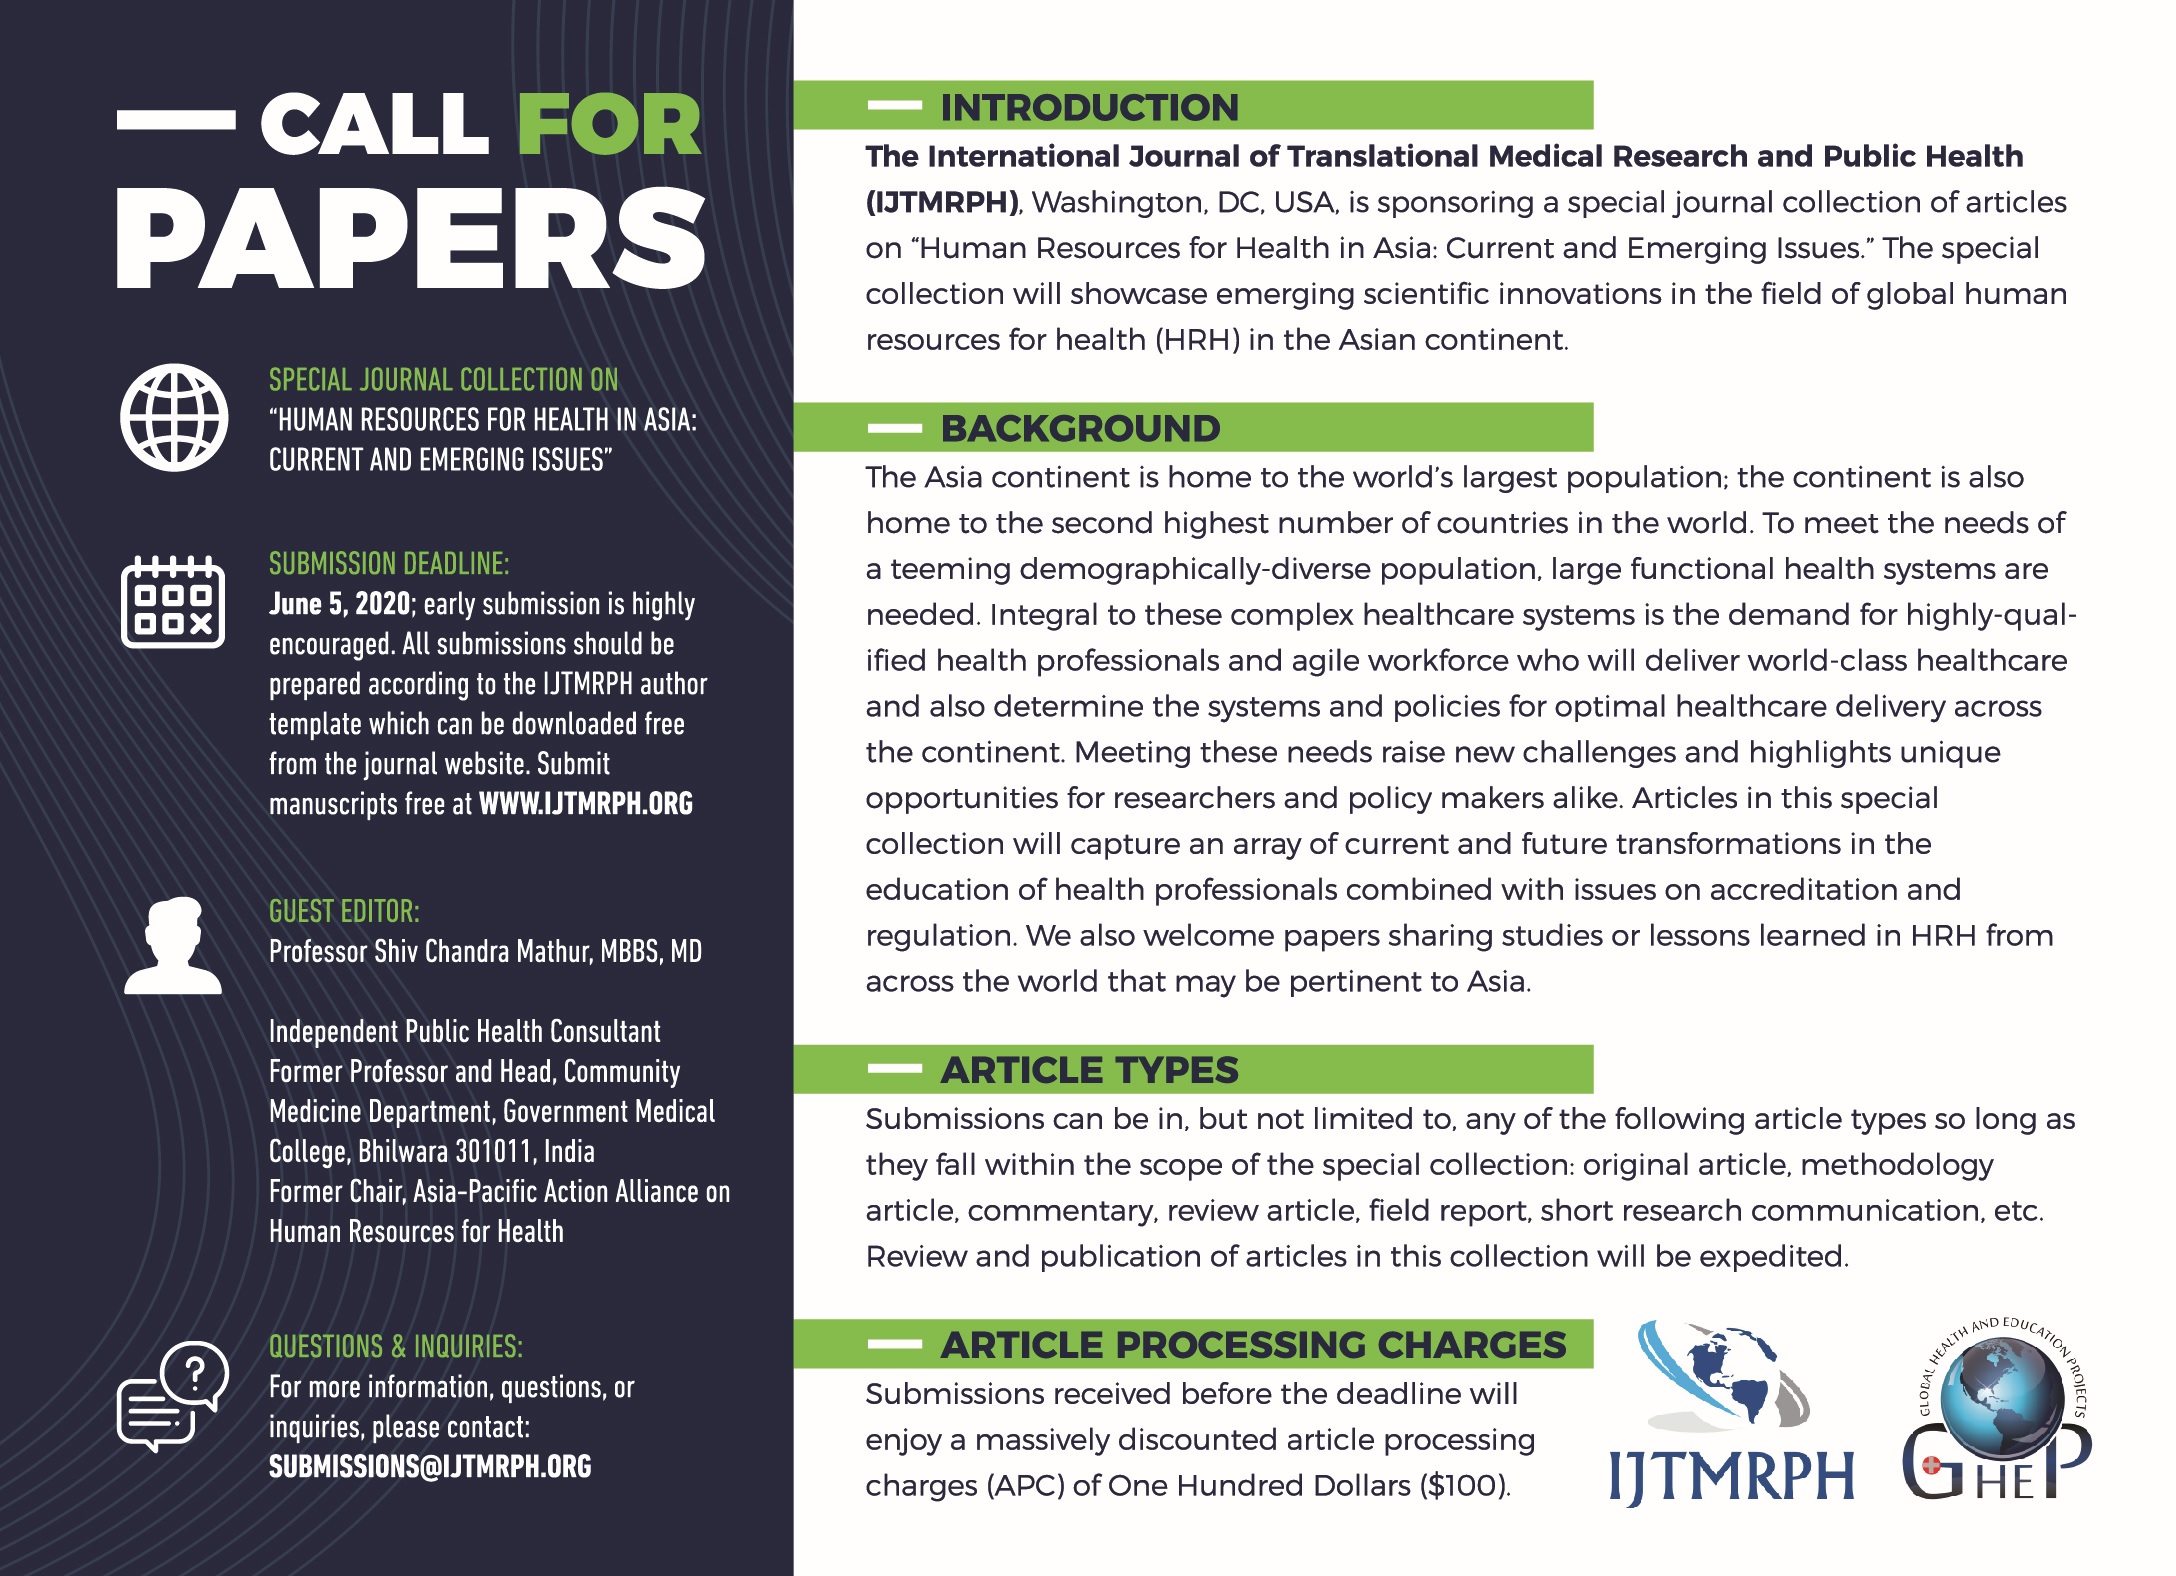 Call-for-papers